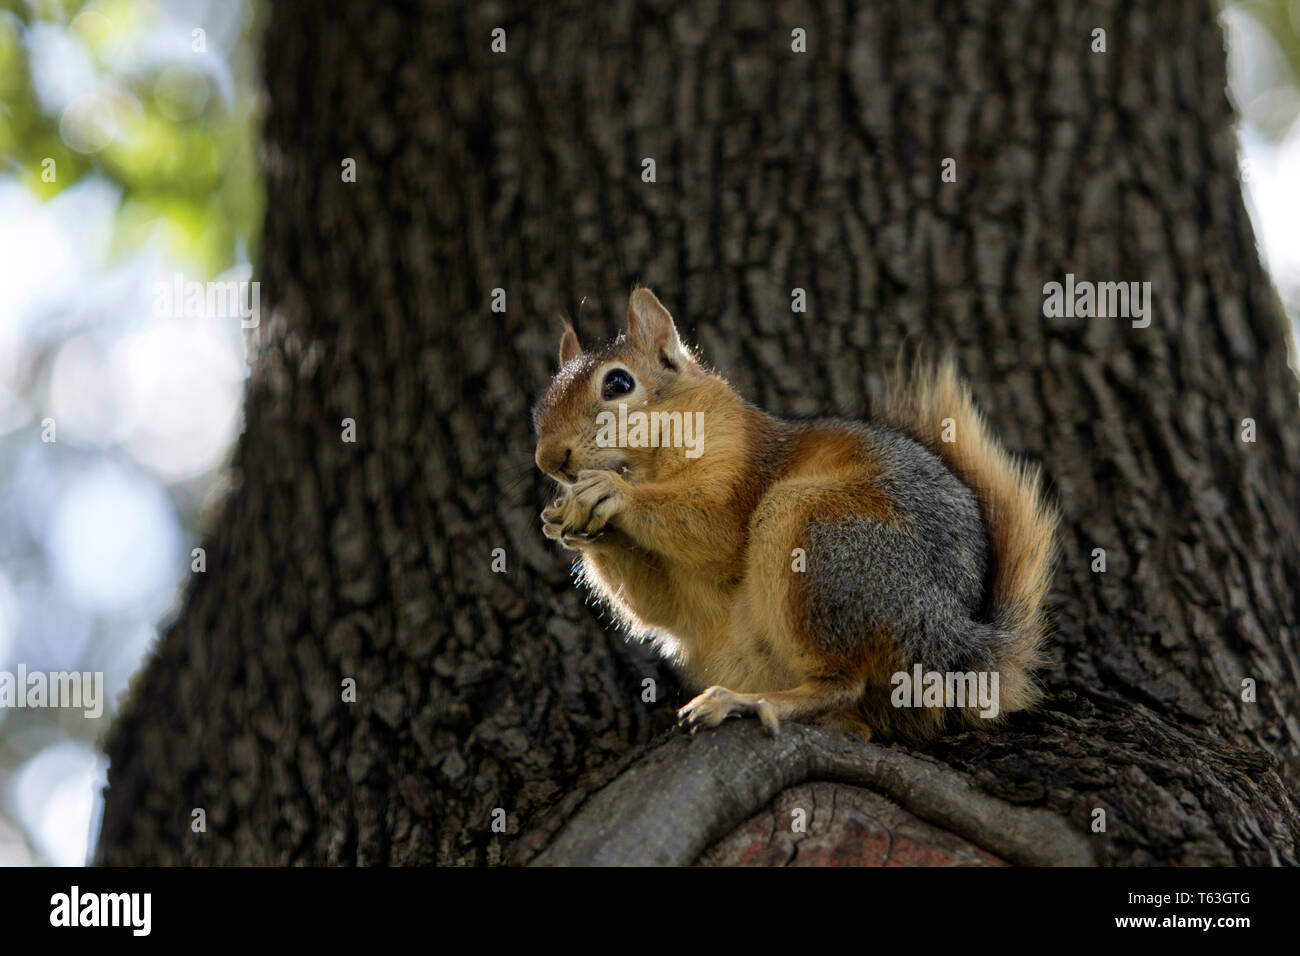 Close up full body profile of a Sciurus Anomalus, Caucasian squirrel on a tree trunk eating something. Stock Photo